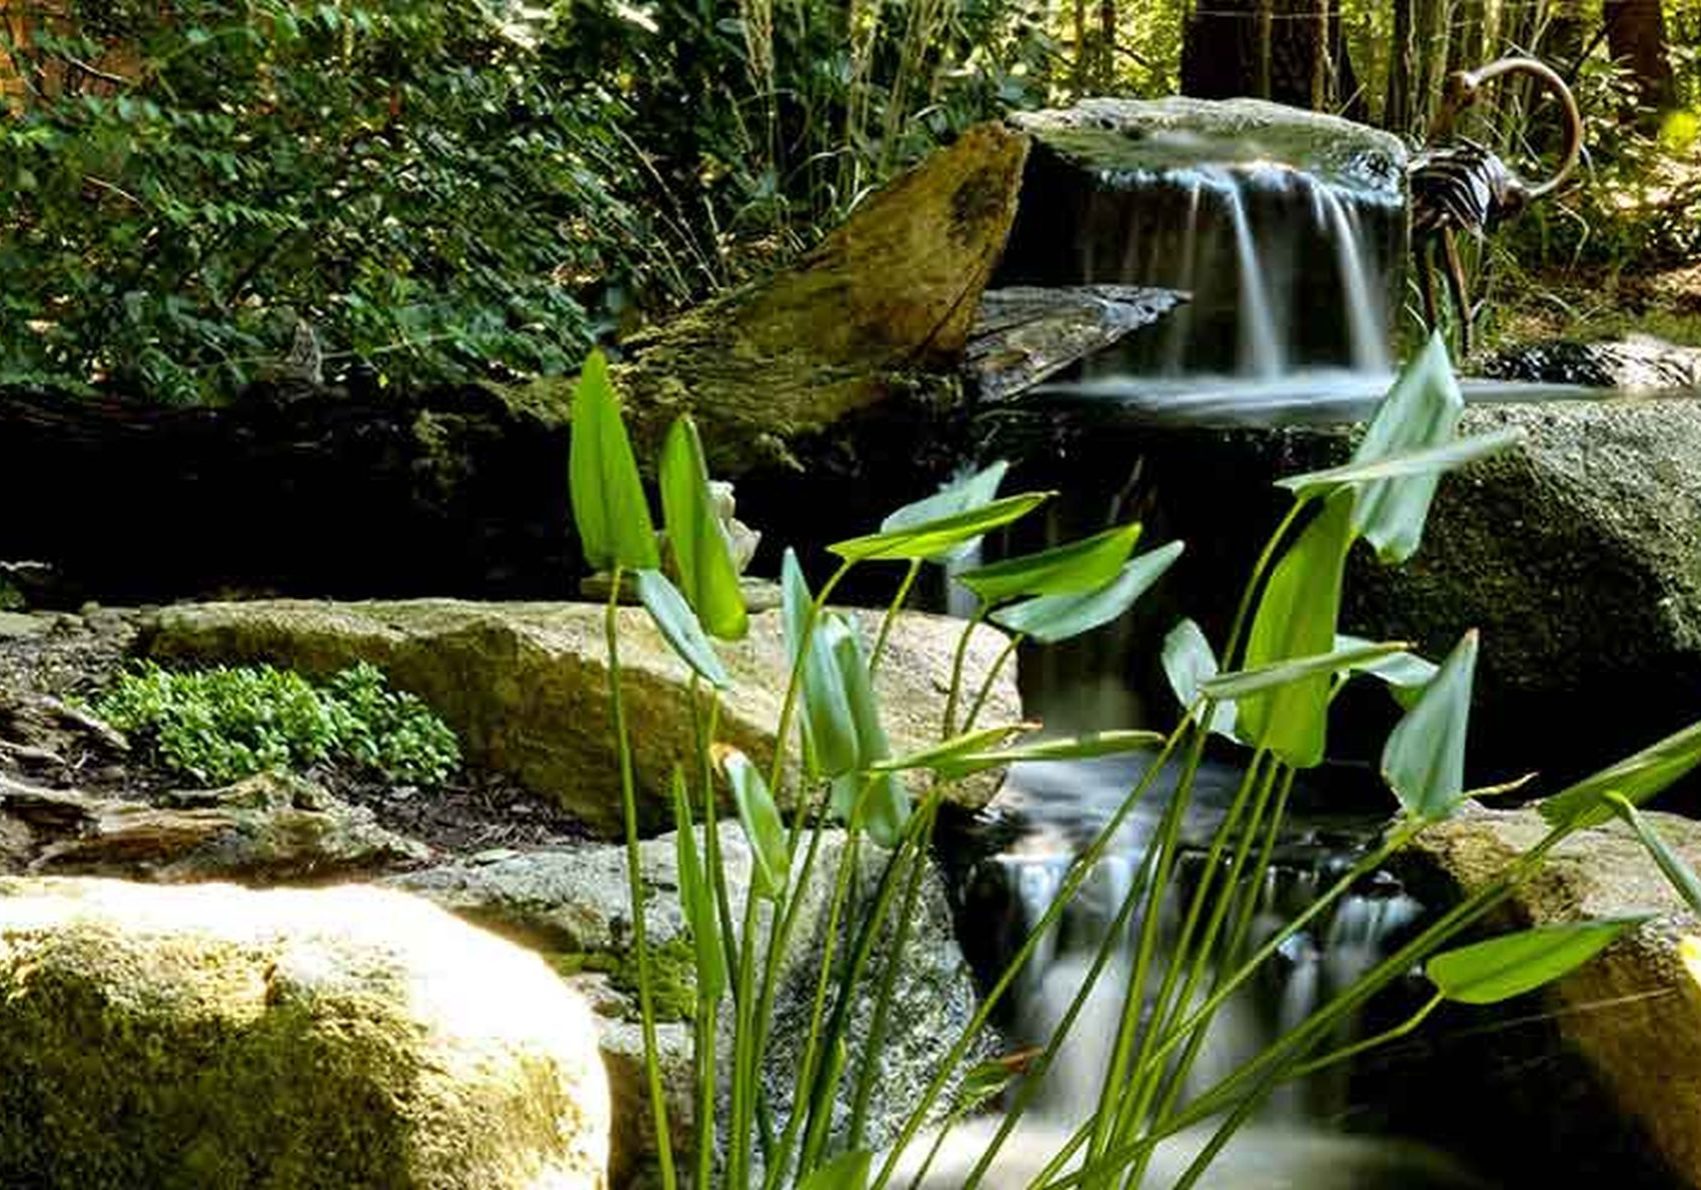 A waterfall in a garden with plants and rocks.